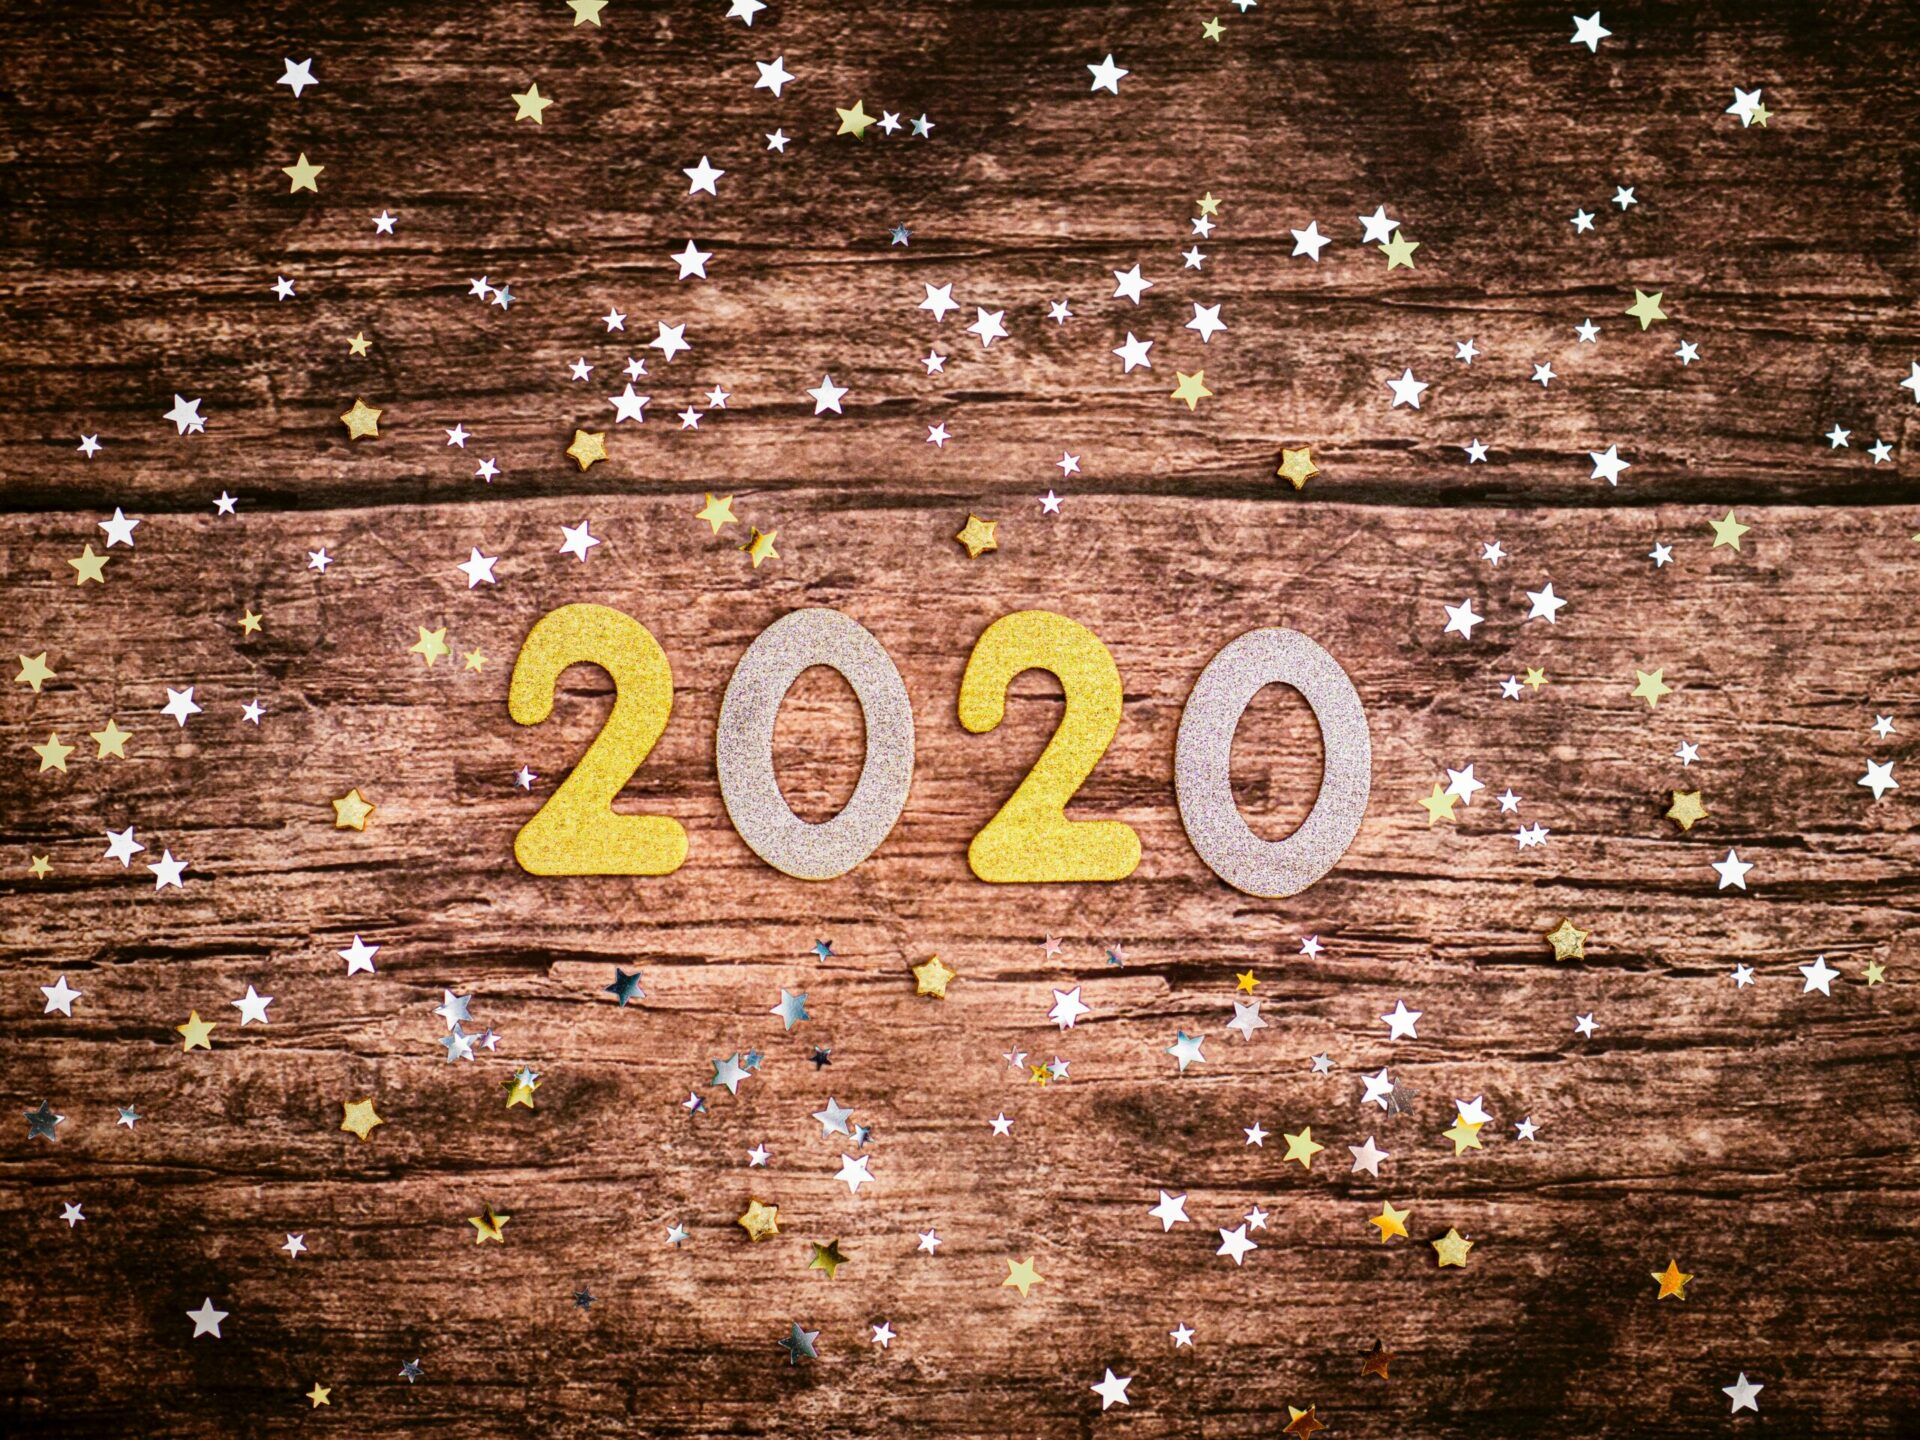 The year 2020 with festive background